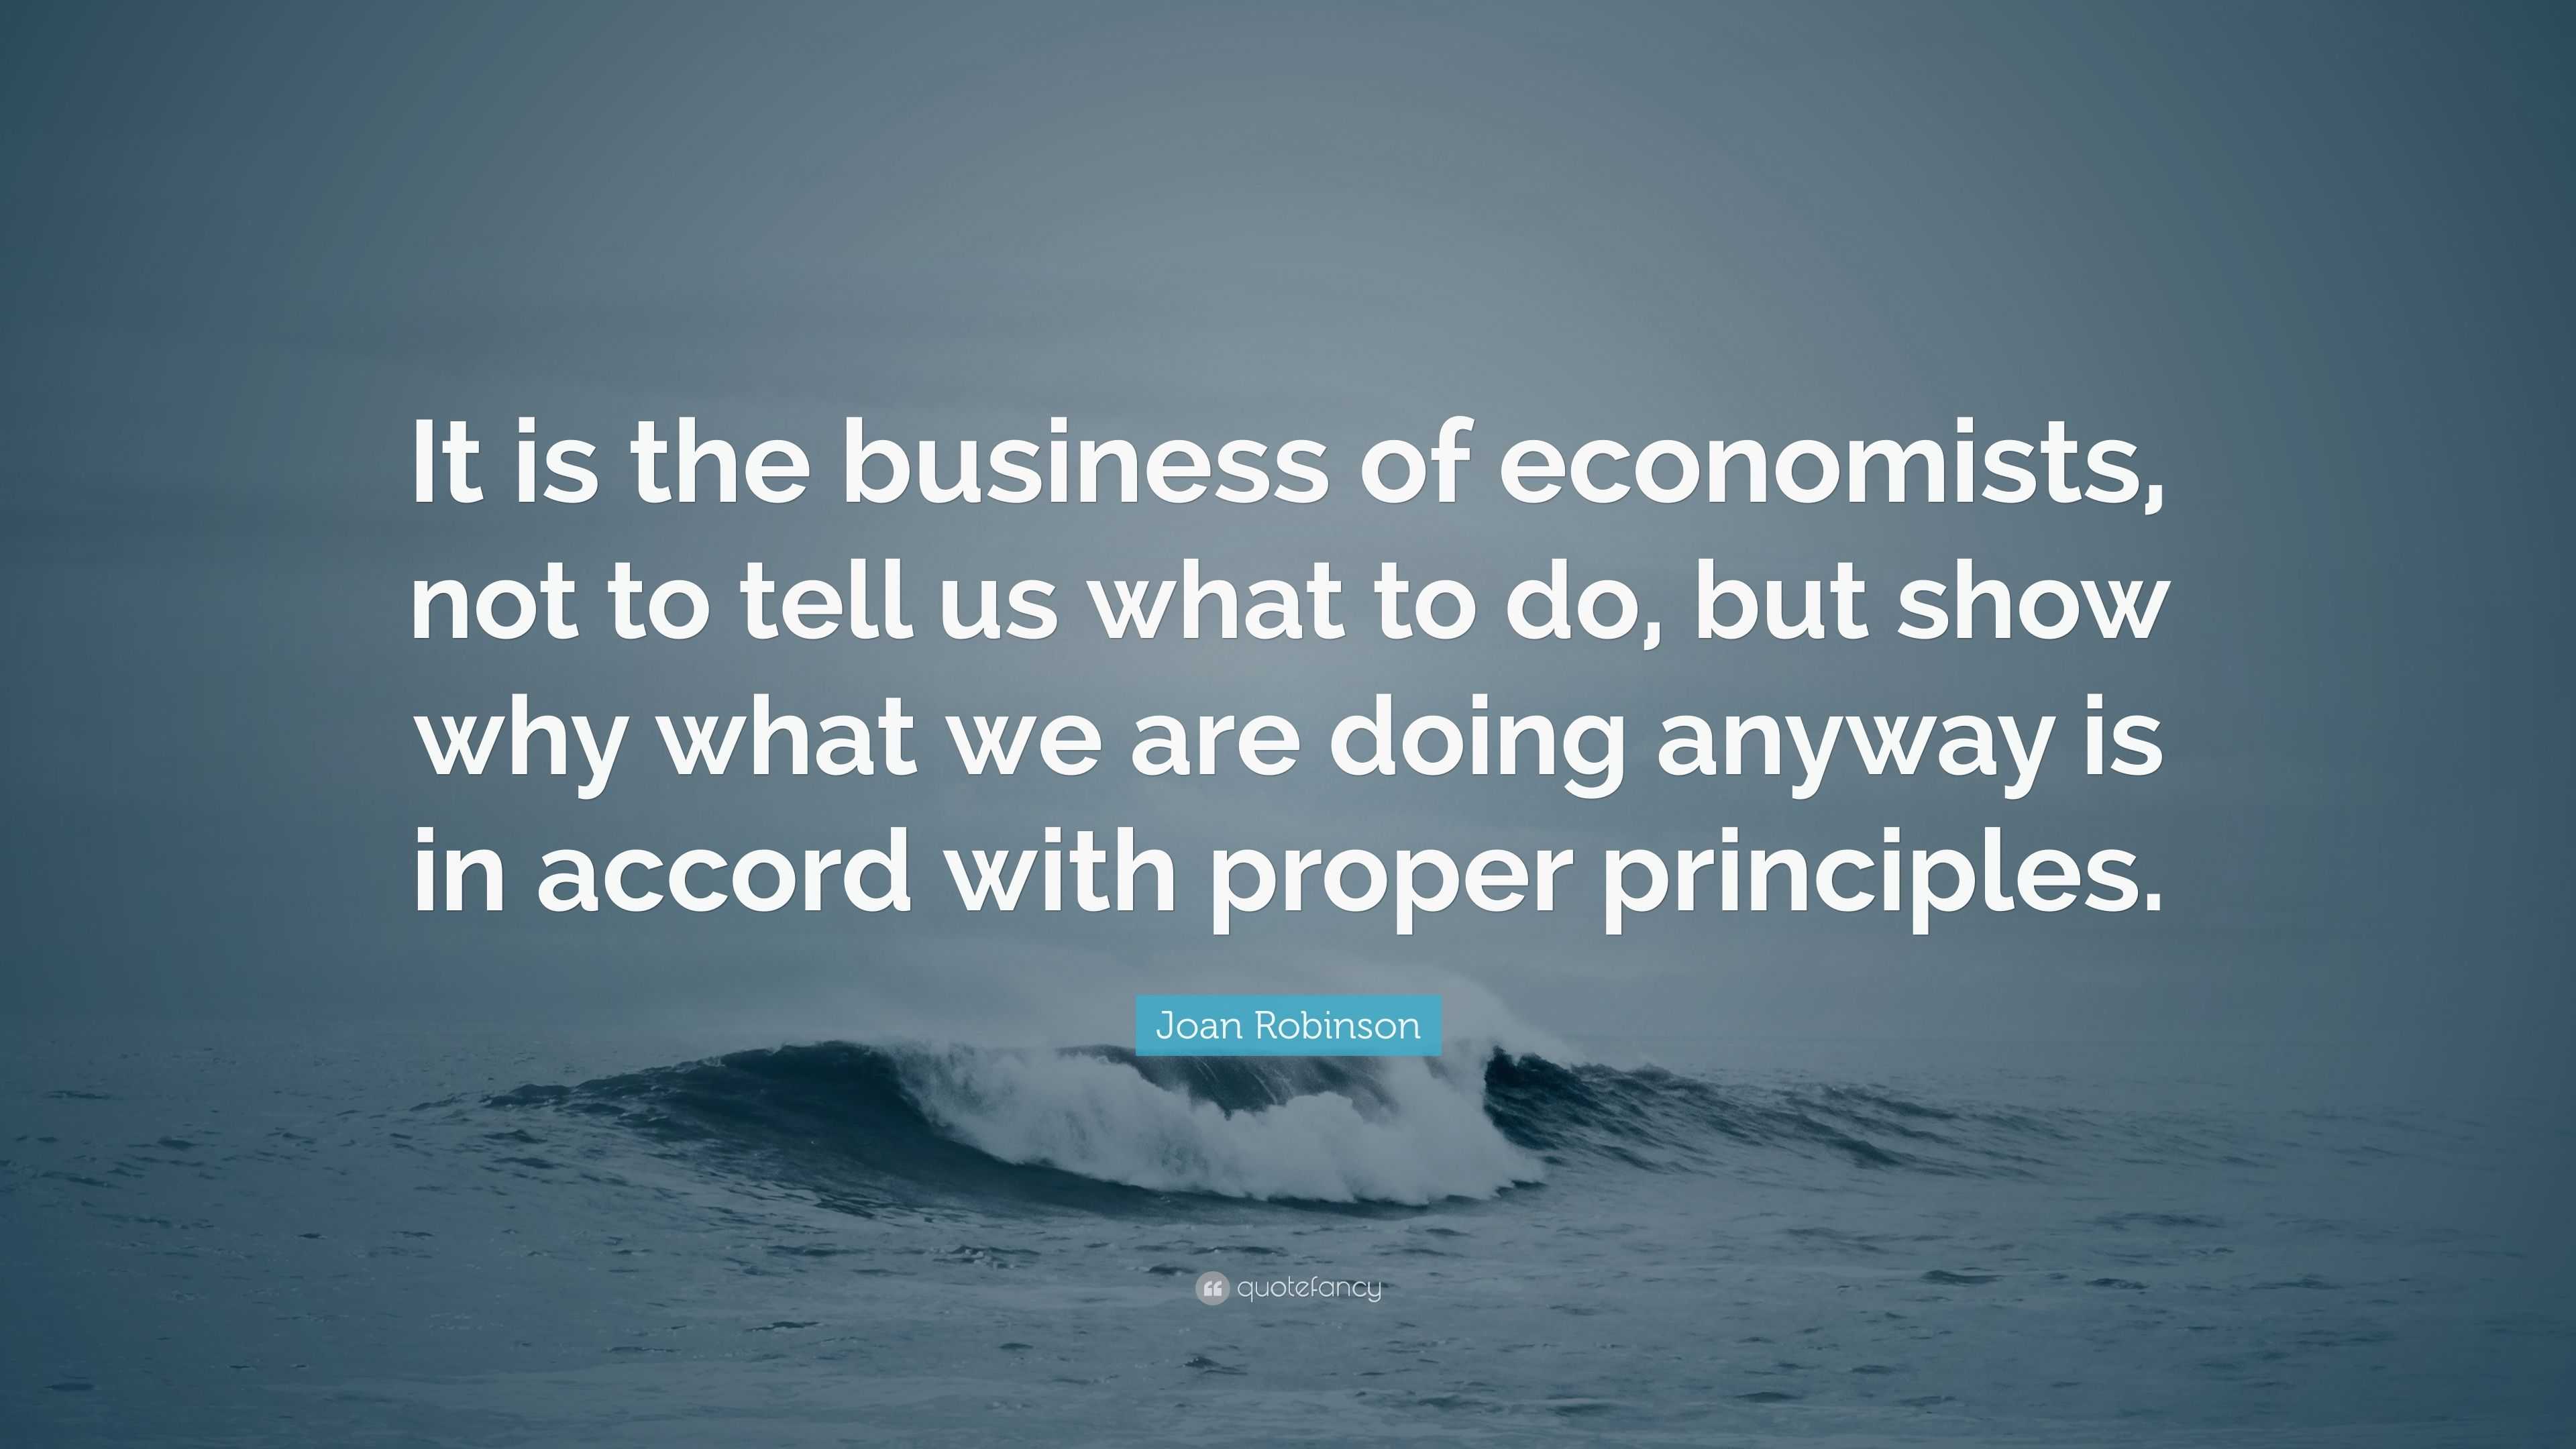 Joan Robinson Quote: “It is the business of economists, not to tell us ...